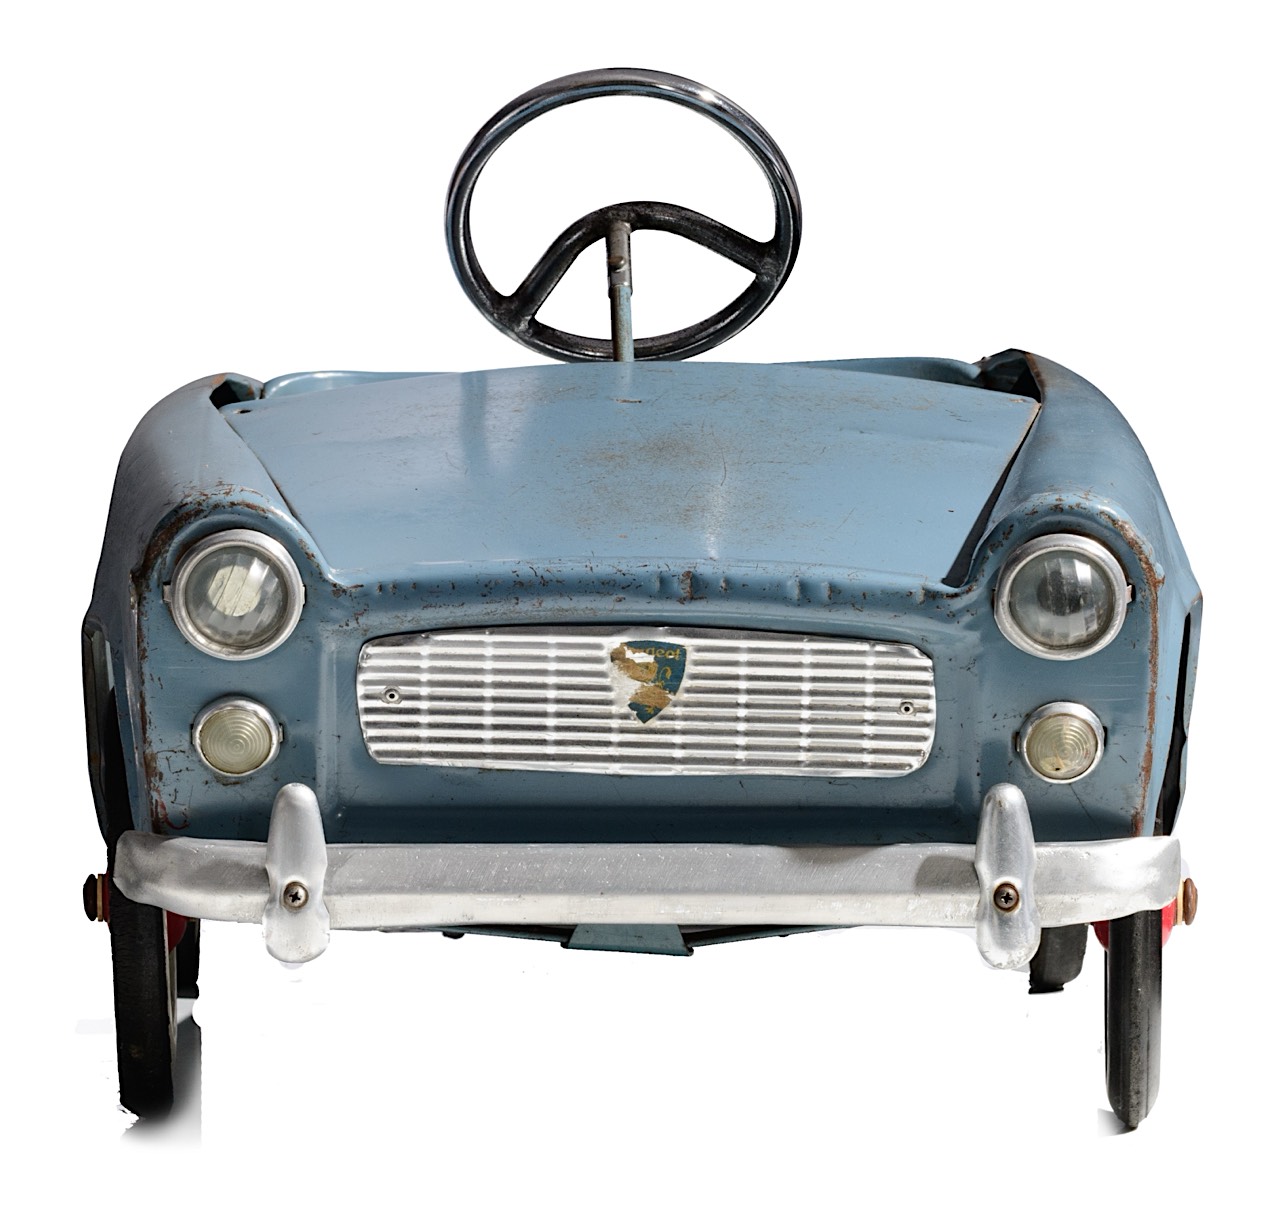 A 'Grand deluxe' edition Torck ' Peugeot' blue metal pedal car, 1962, 43,5 x 45 x 109 cm - Image 2 of 15